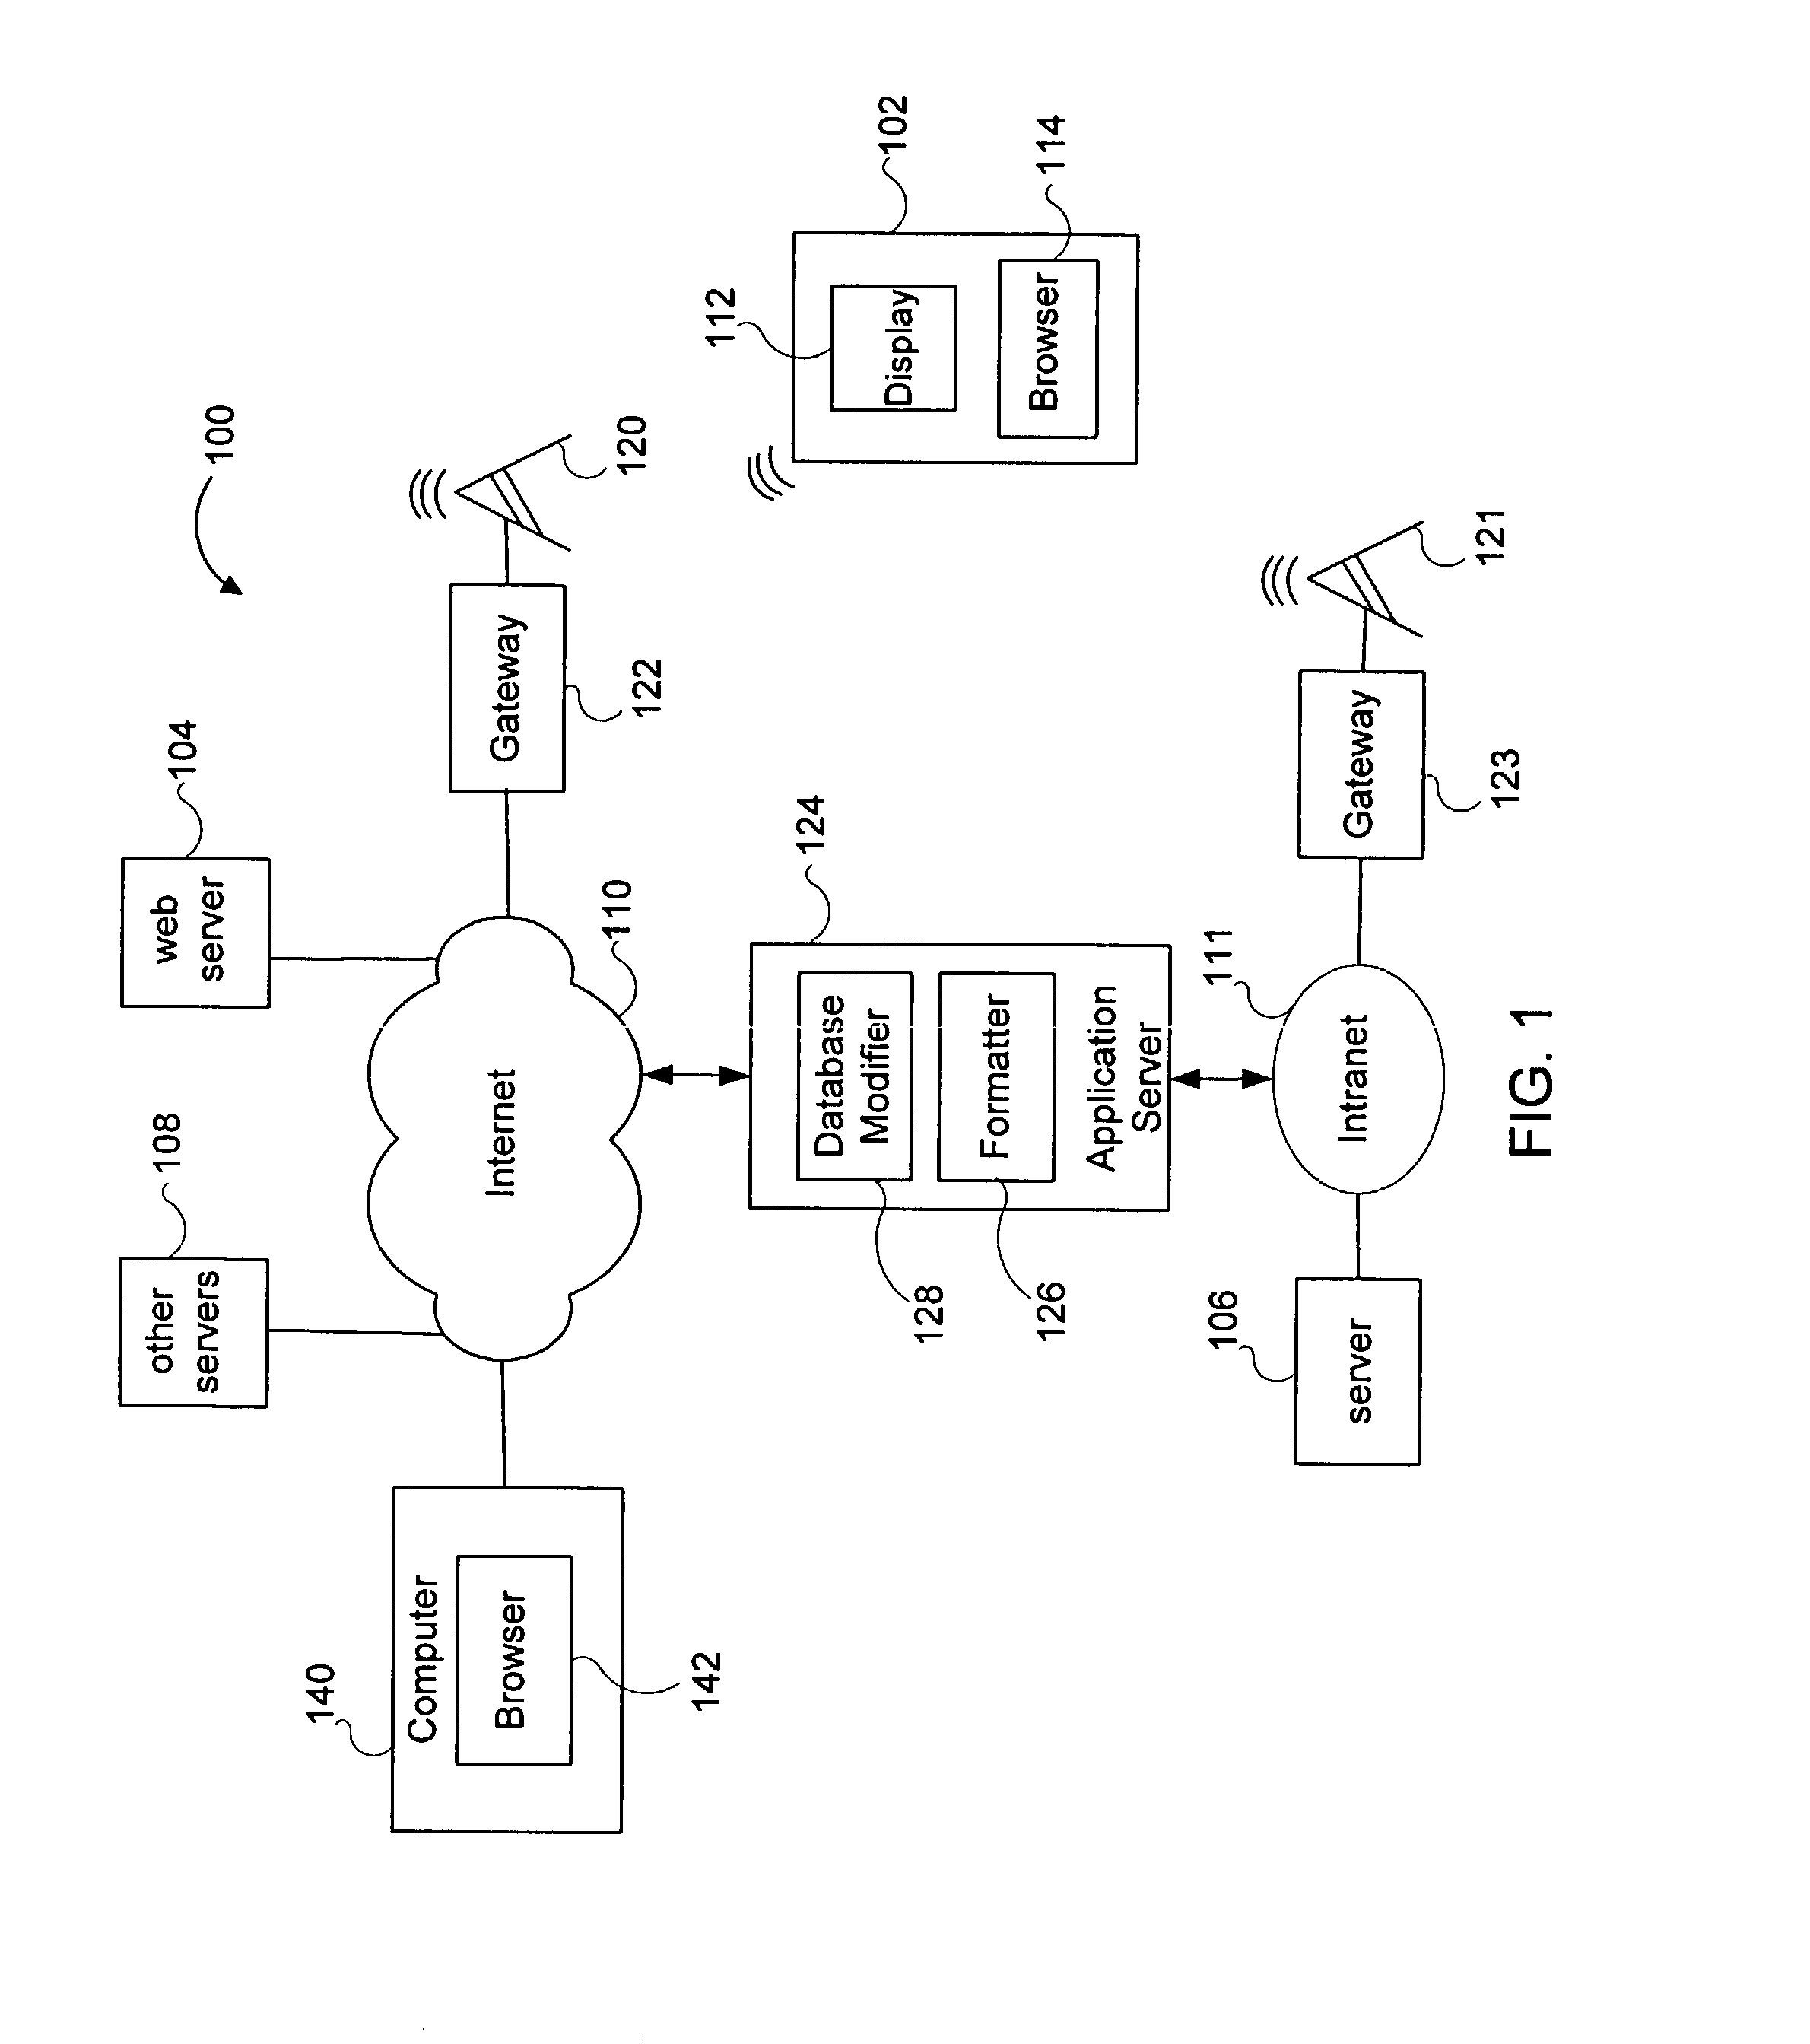 System and method for modifying a document format